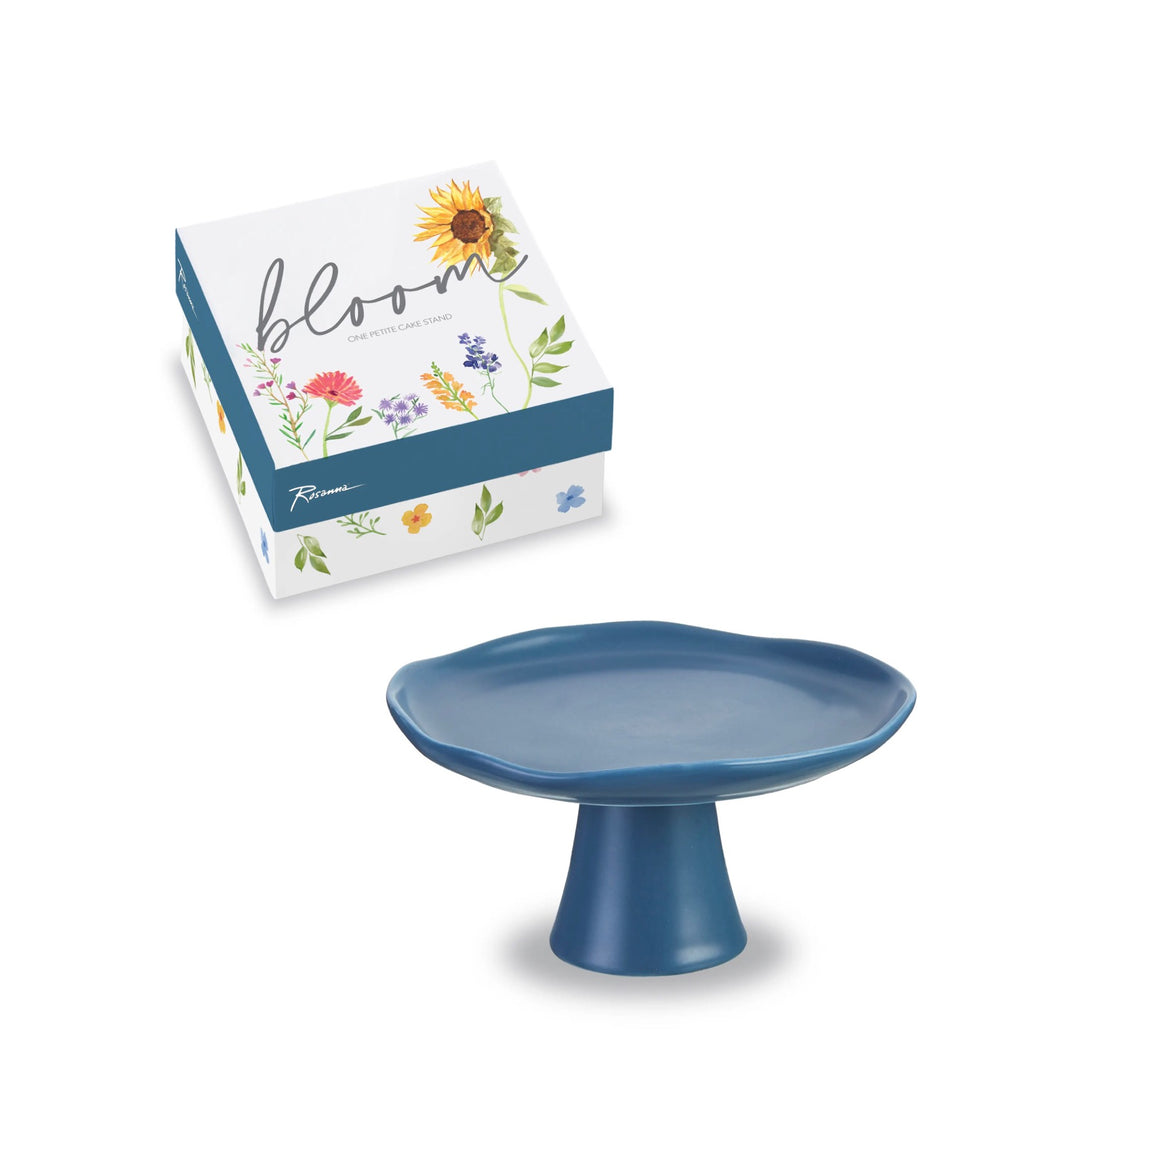 CAKE STAND - BLUE YALE PORCELAIN SMALL